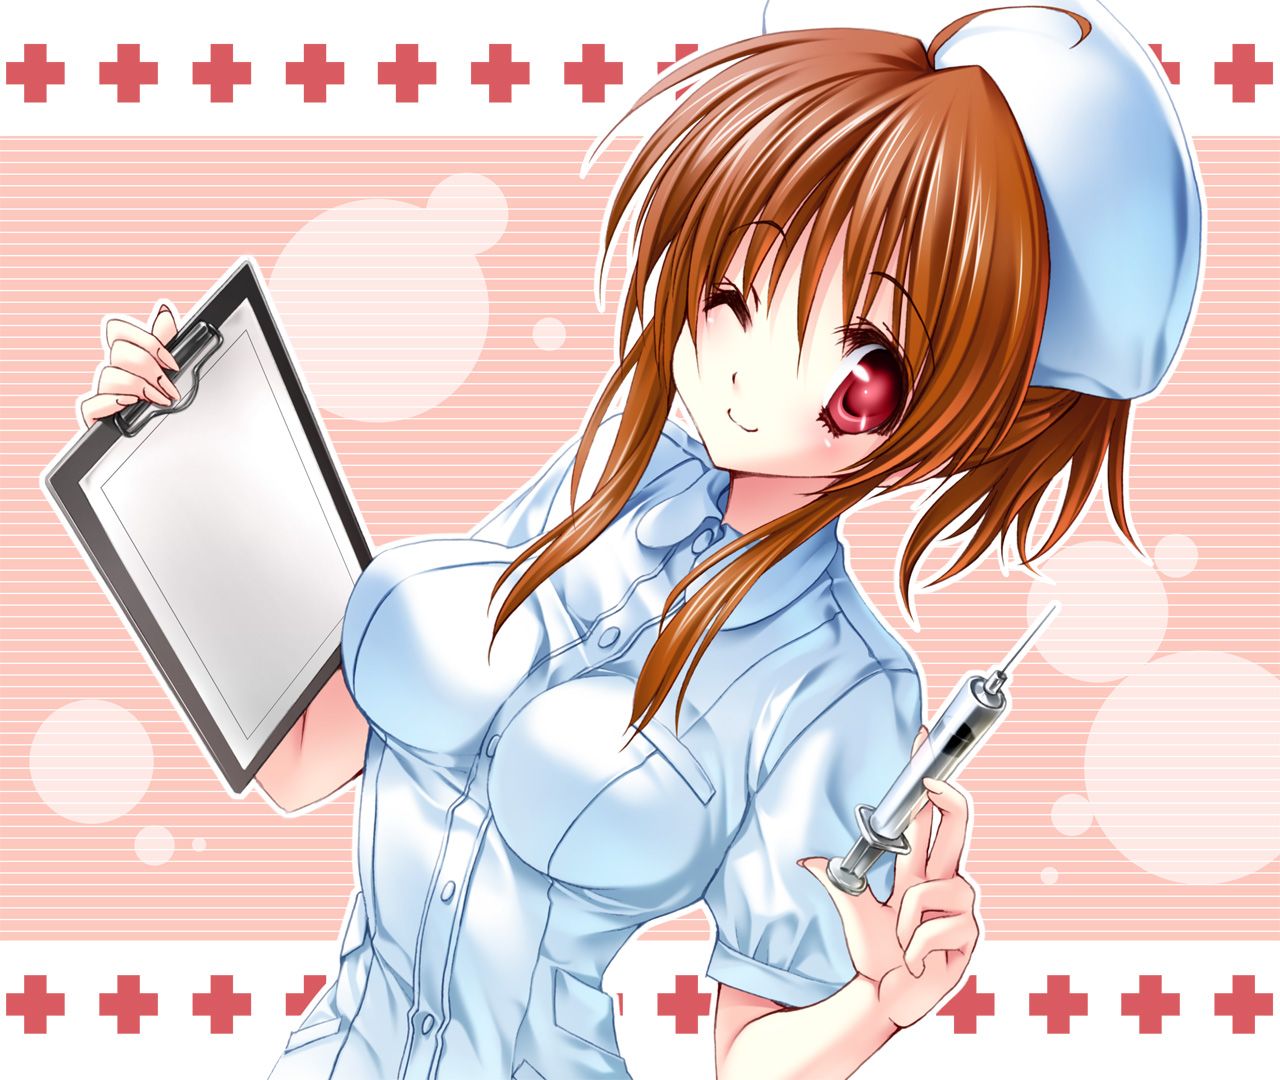 Nurse Uniform ass hole into the syringe, he turned and want to become pretty picture wwww part01 19